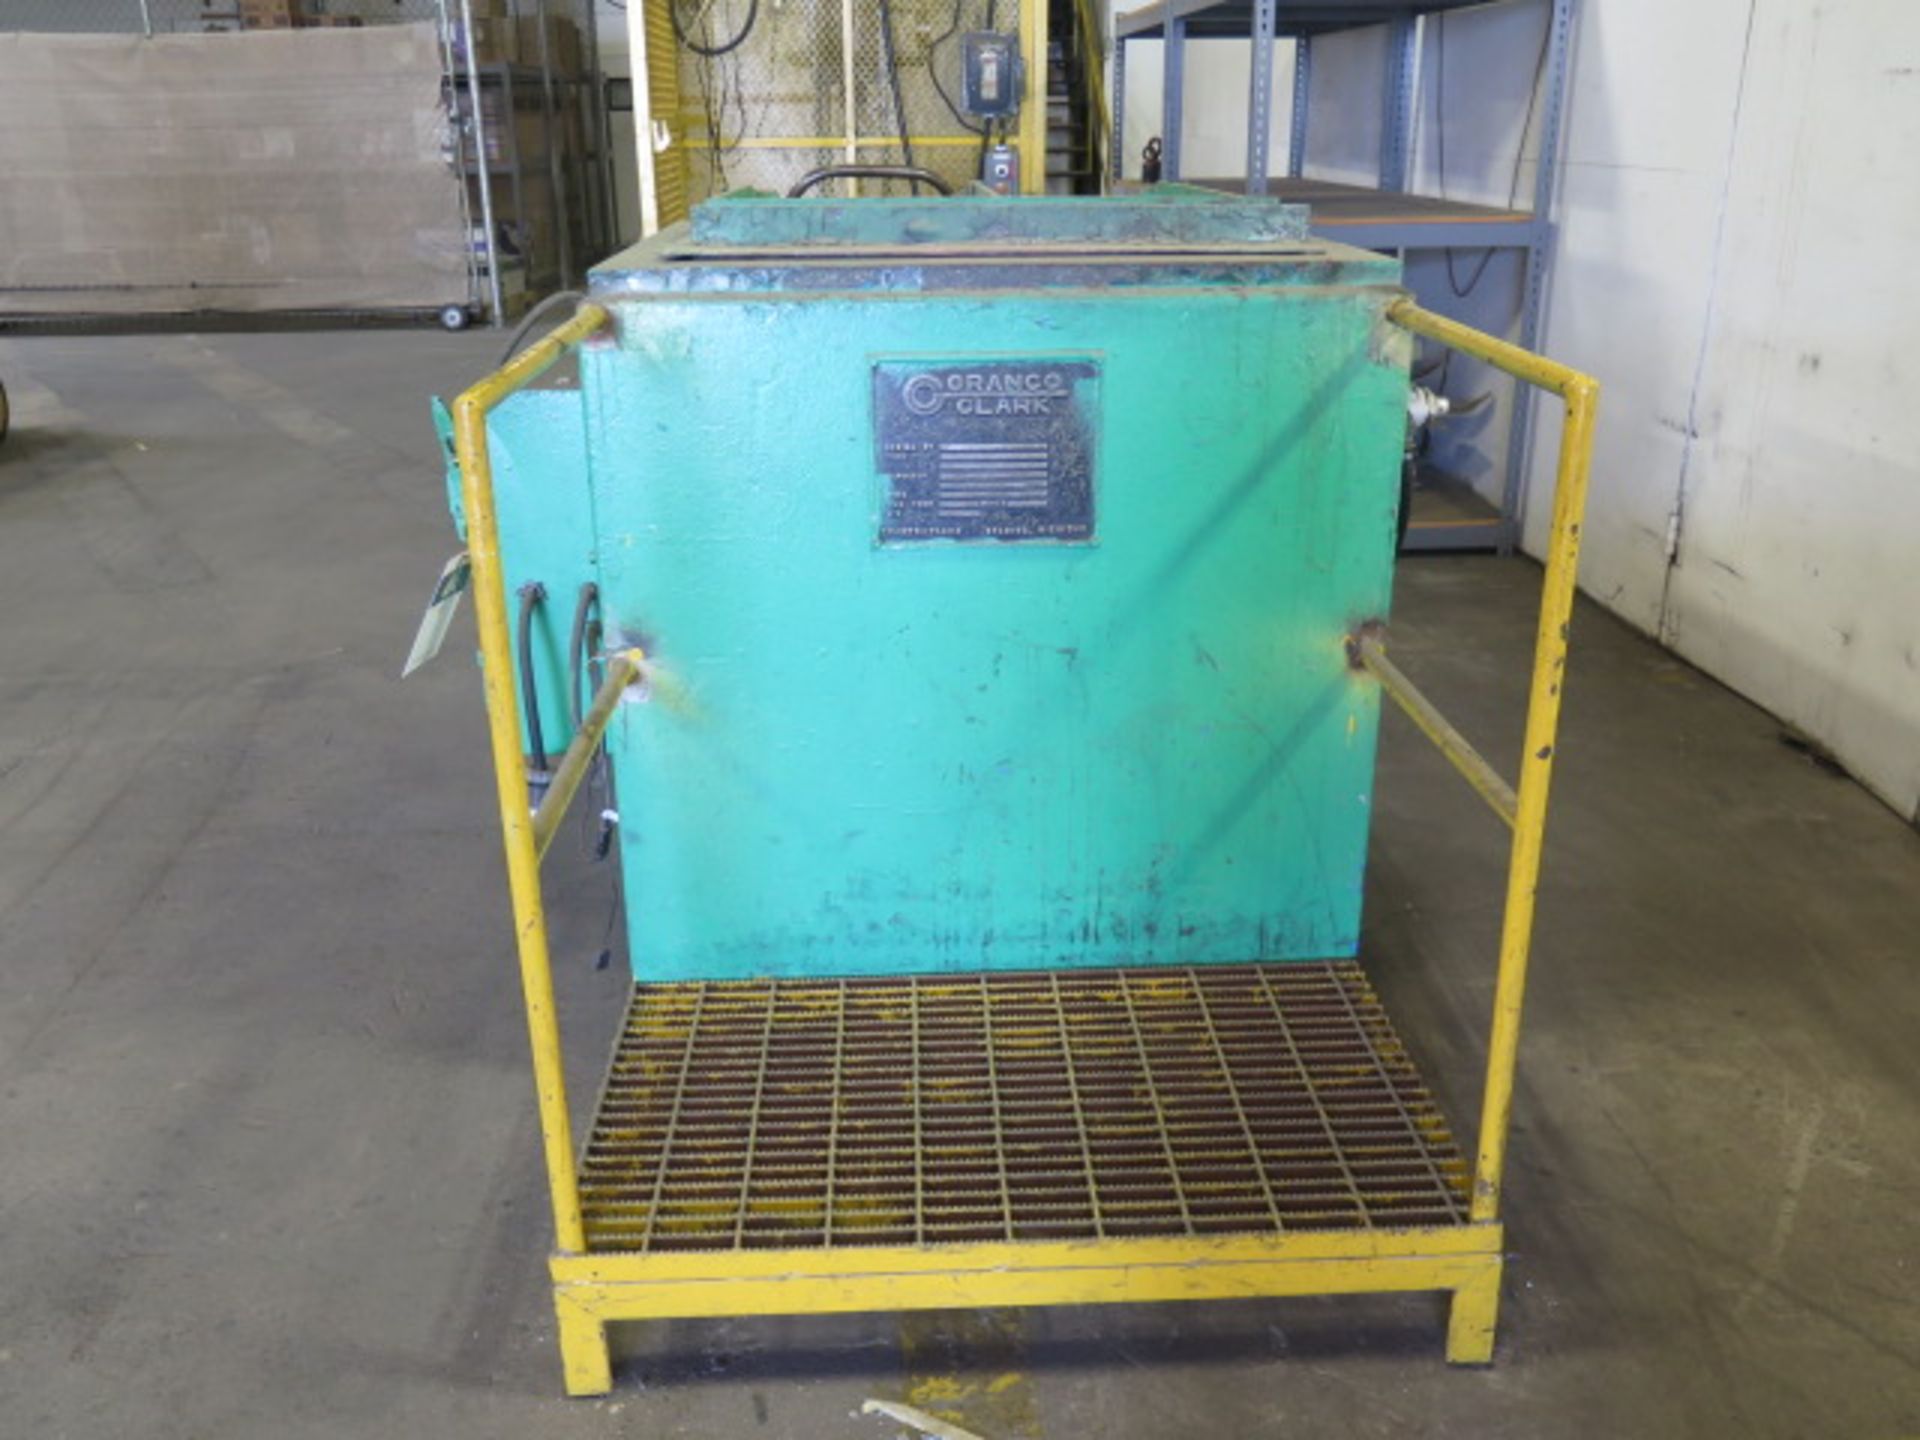 Granco Clark 9kW Non Recirculating Die Oven w/ 30" x 30" x 30" Chamber, 1000 Deg F, 460V, SOLD AS IS - Image 3 of 6